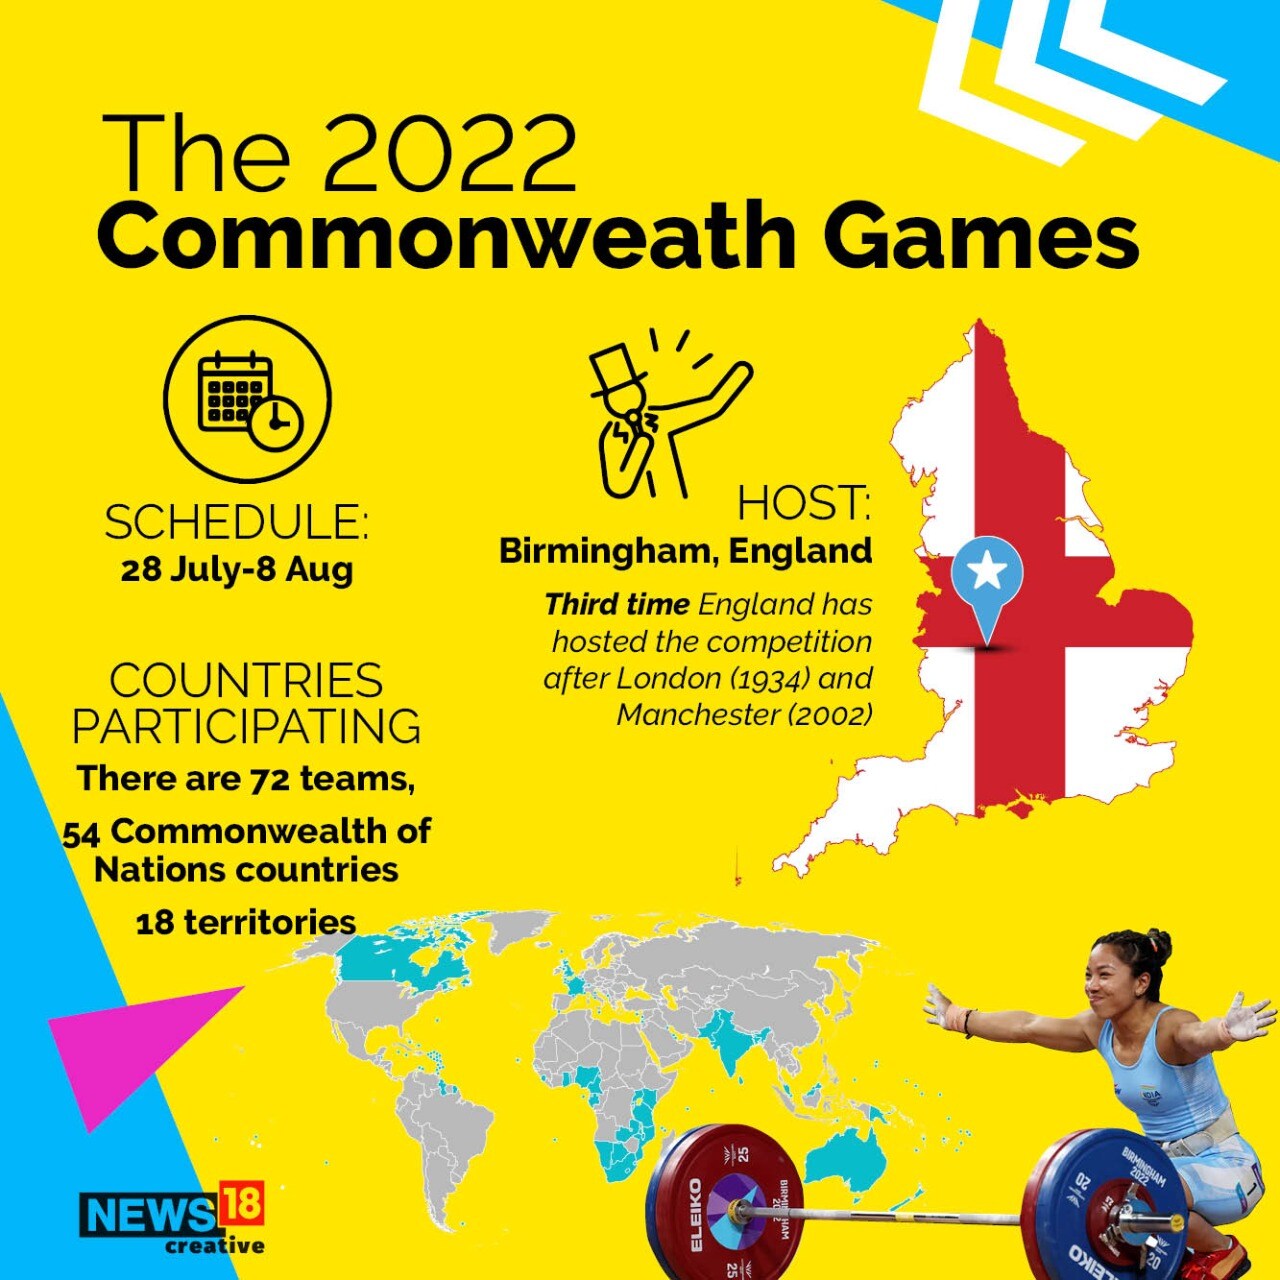 The 2022 Commonwealth games, held in England from 28 July to 8 August.